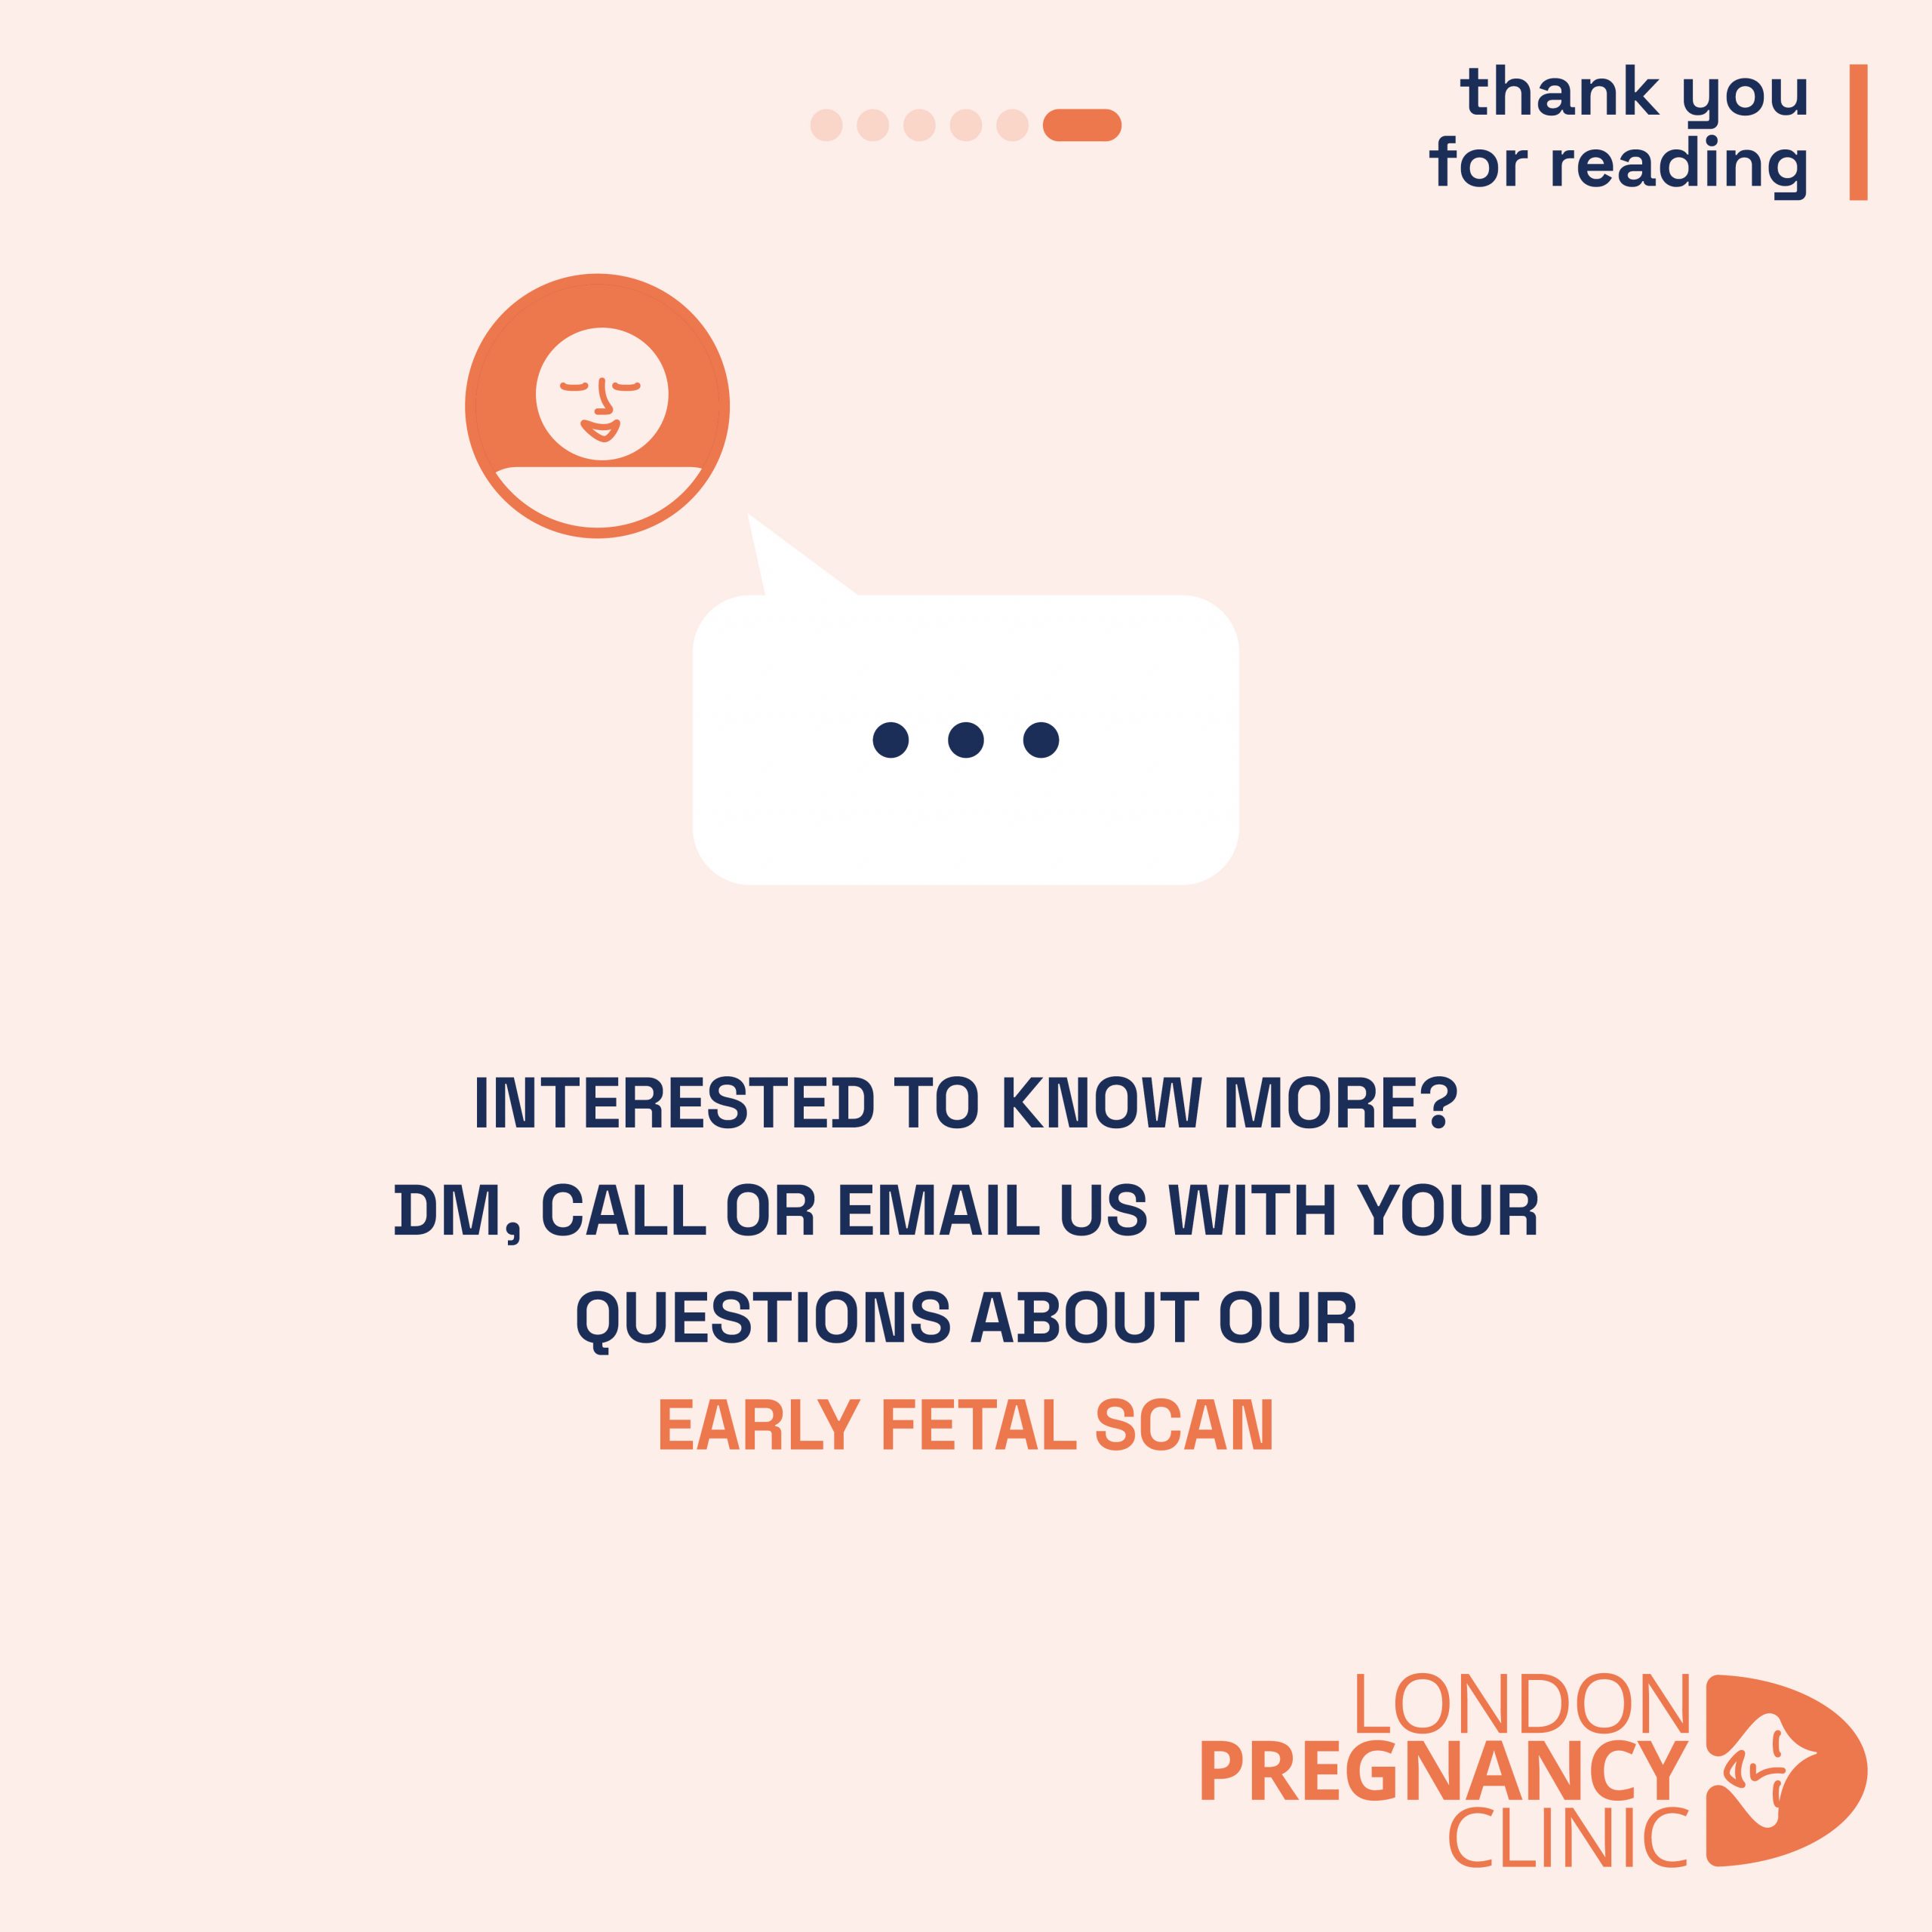 Closing graphic from London Pregnancy Clinic thanking readers and inviting dialogue about the importance of early fetal scans.